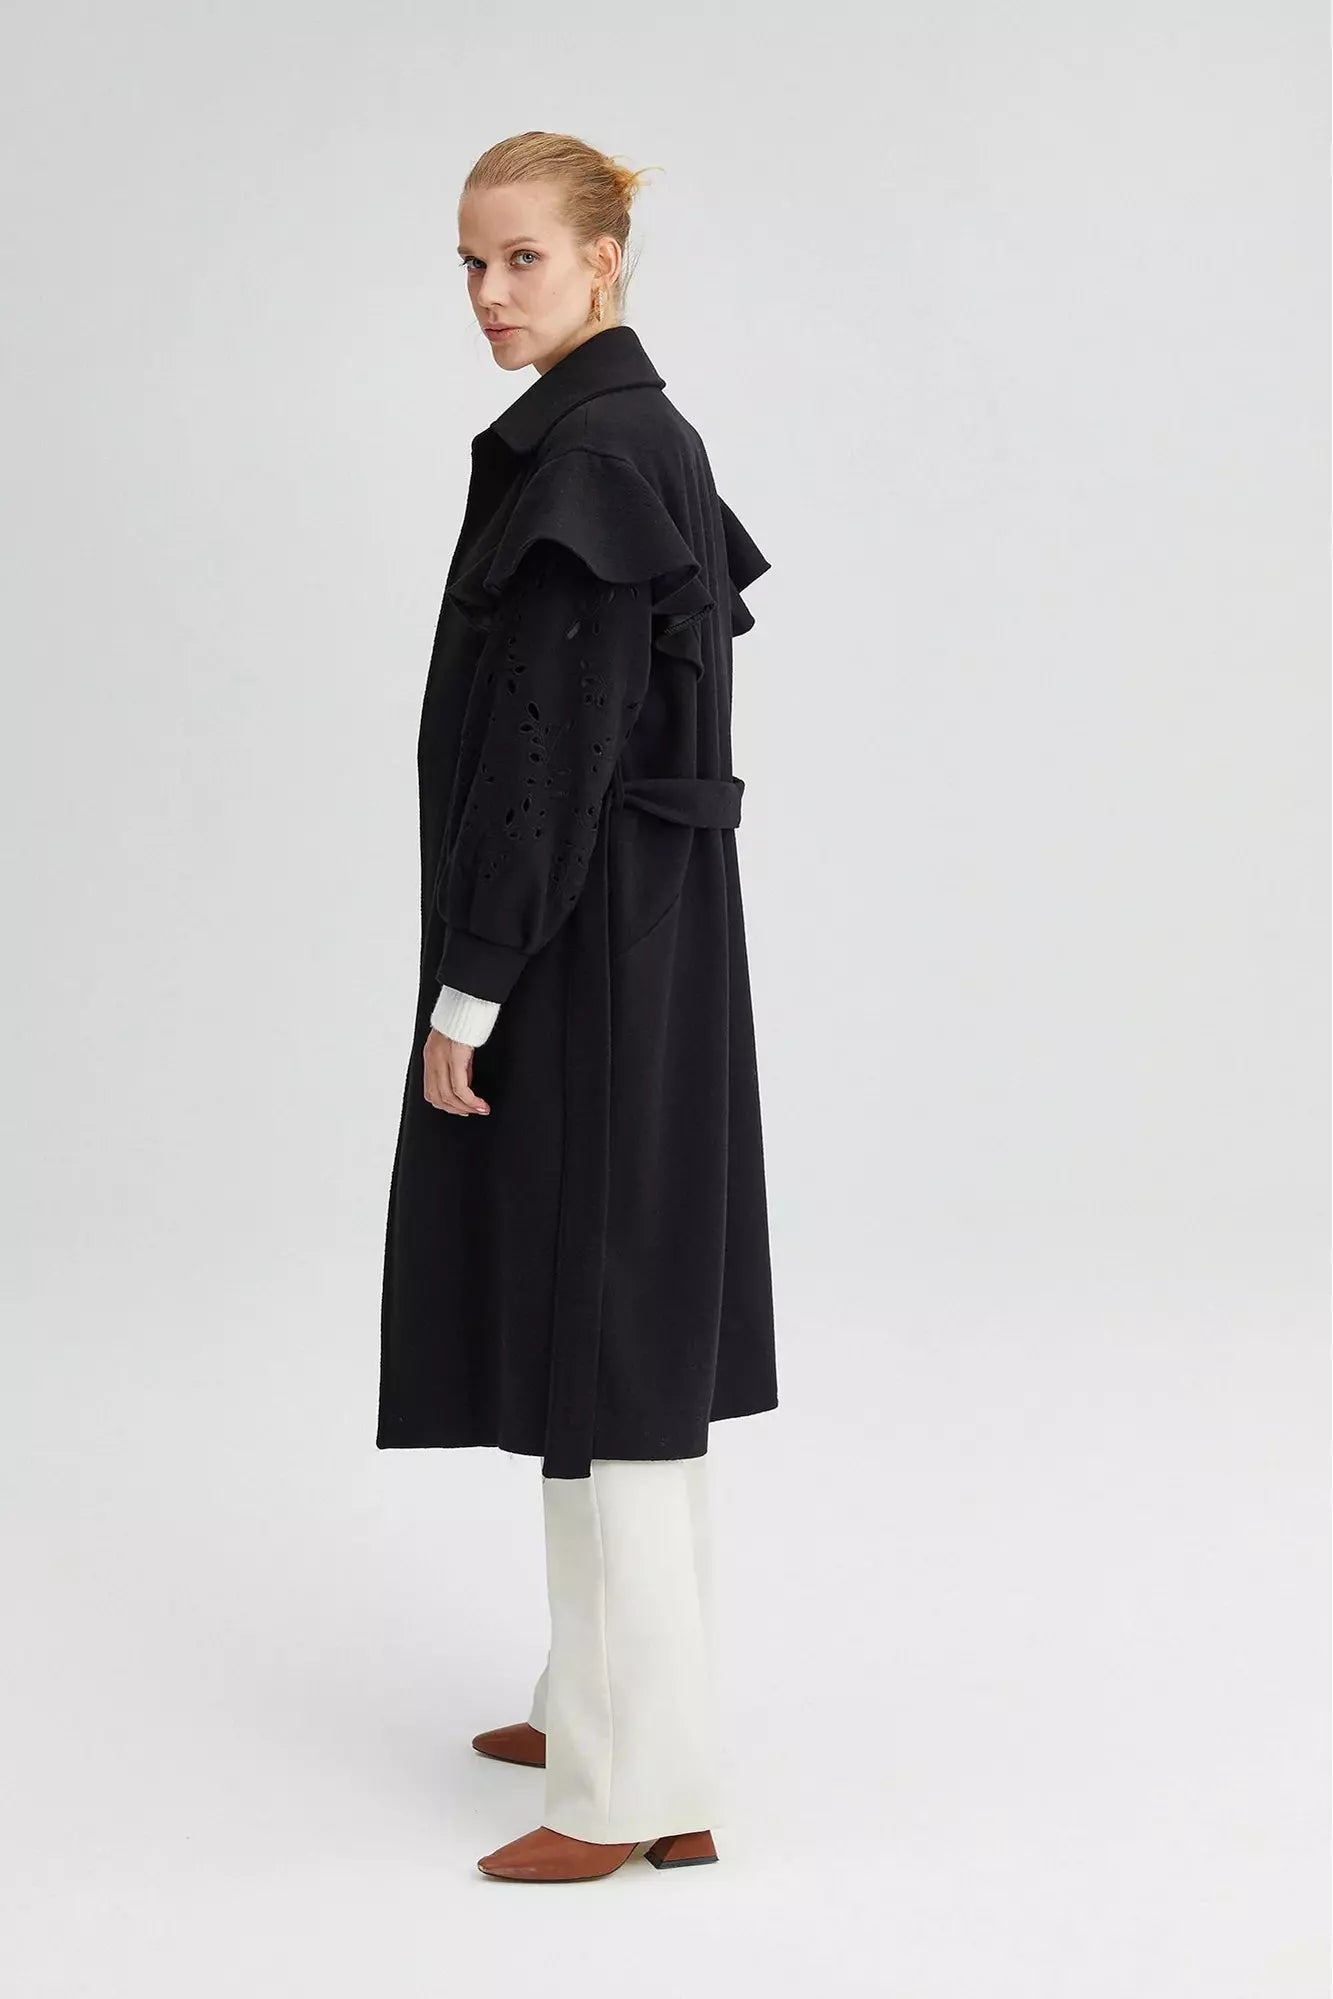 Lace Detailed Coat With Belt - By Baano